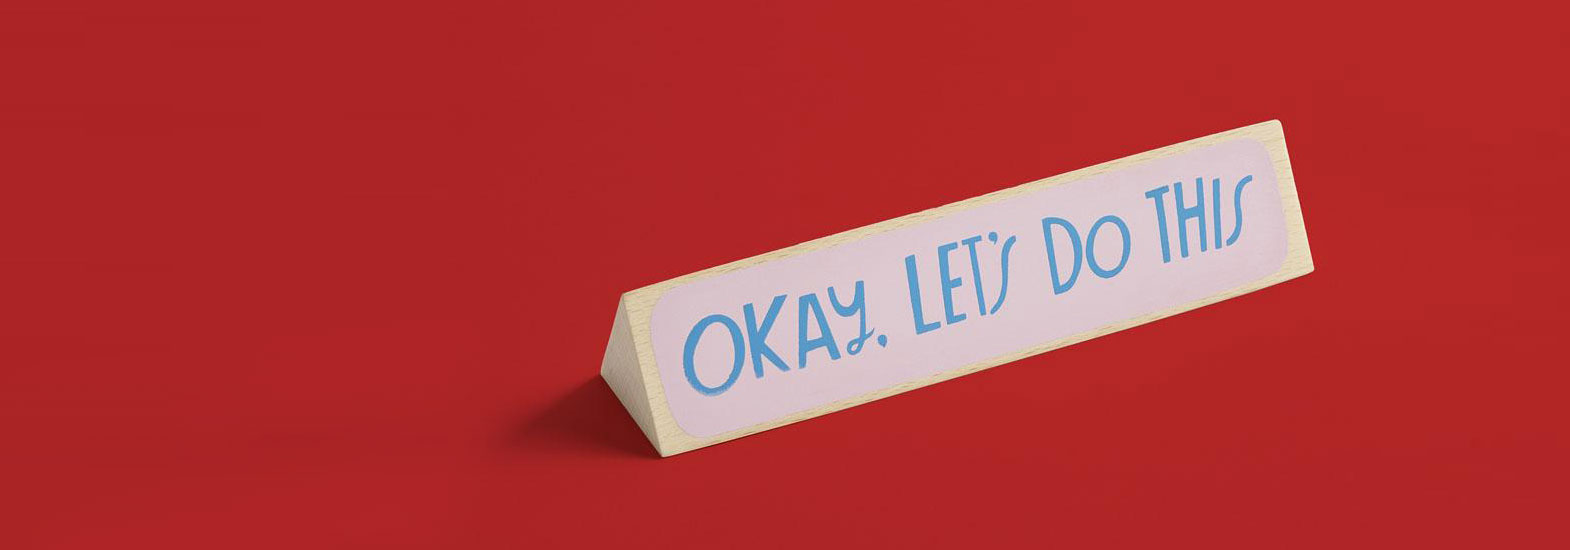 Okay, Let's Do this desk sign by Lisa Congdon